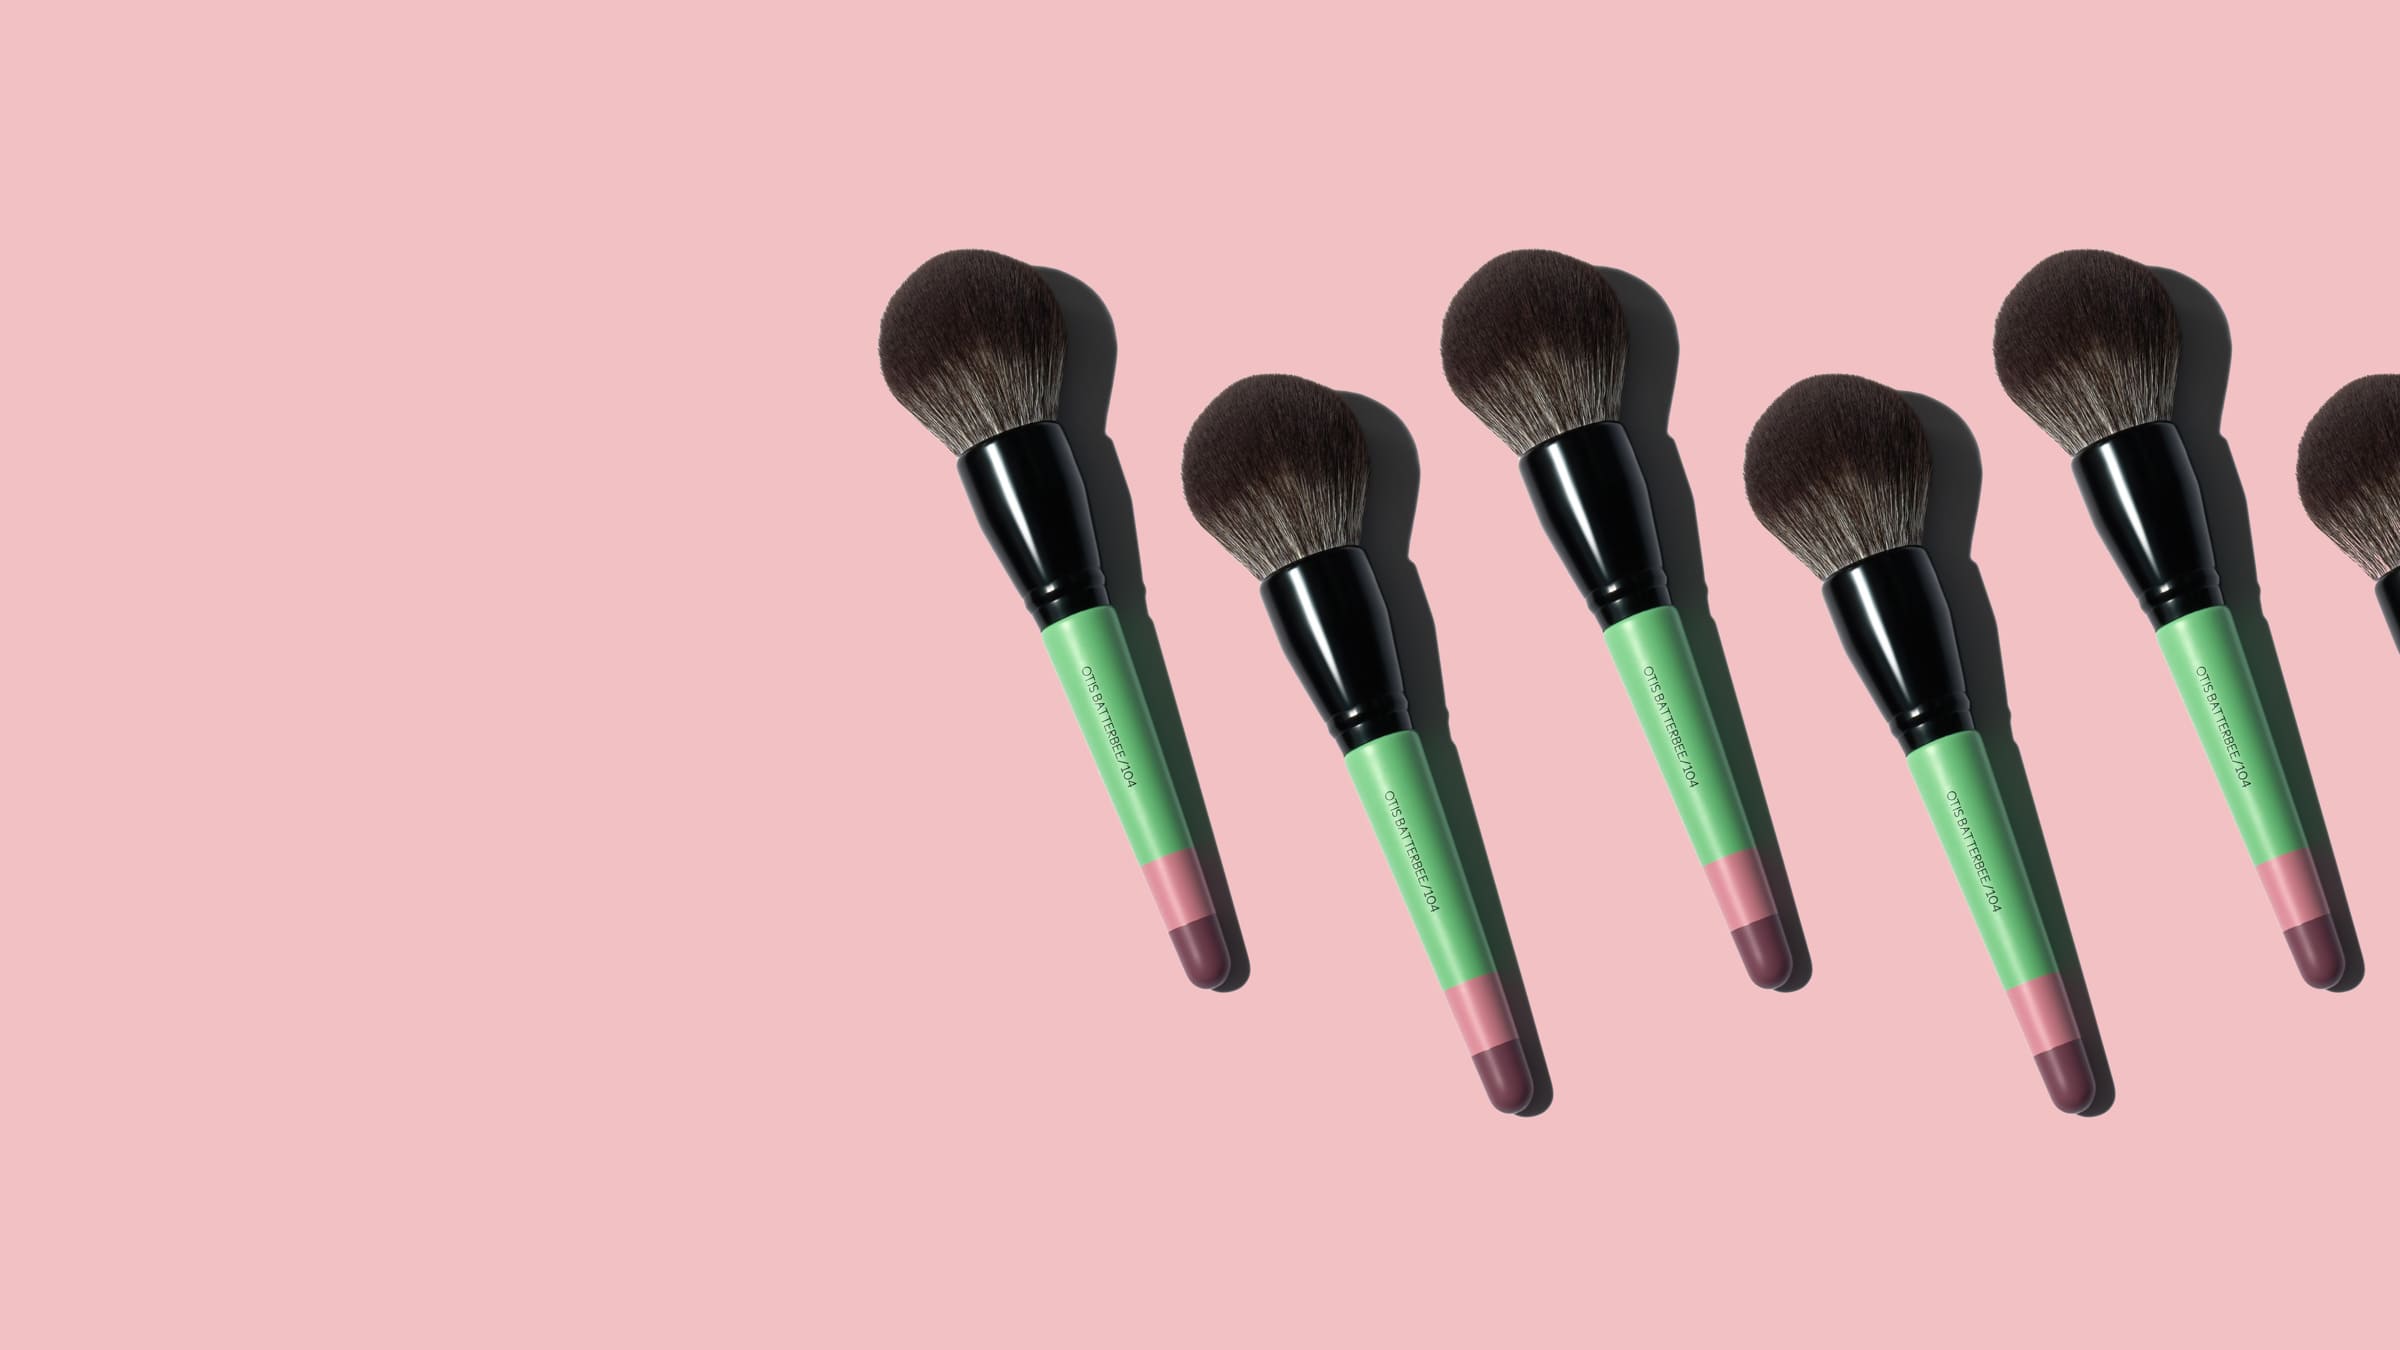 Large Powder and Bronzer Makeup Brush: A high-quality brush ideal for applying loose powder and bronzer, ensuring a seamless and natural finish